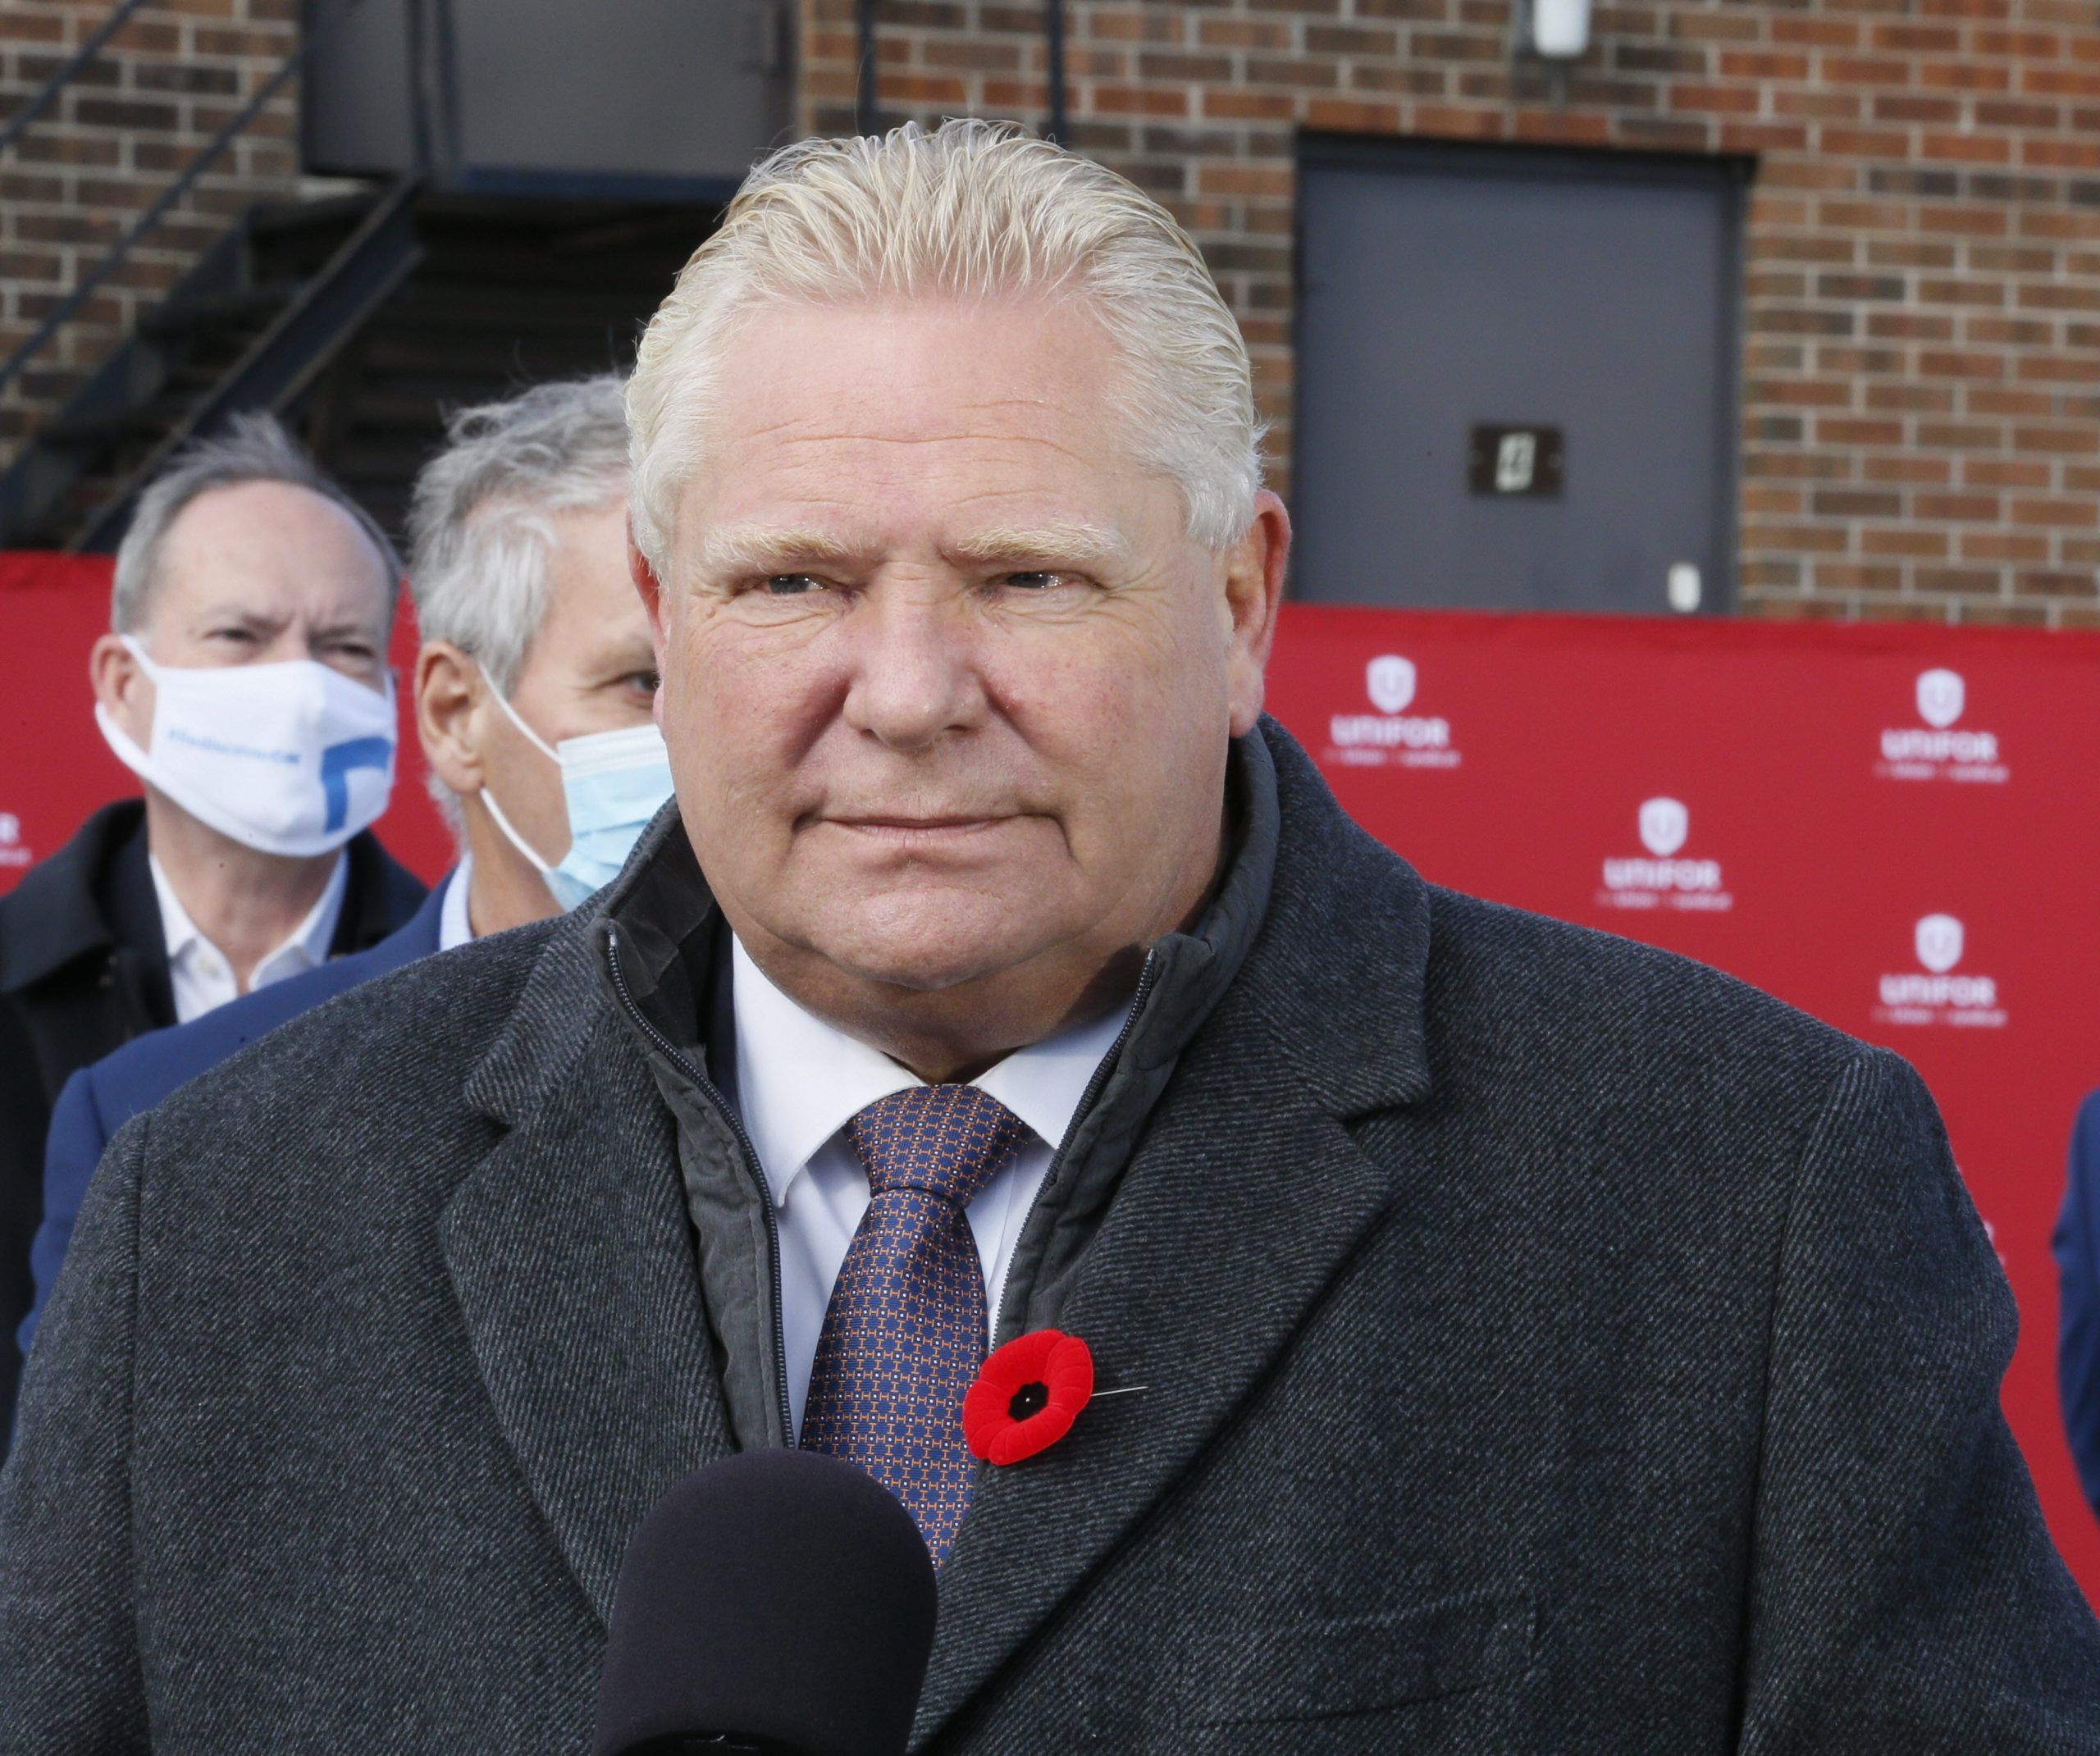 Someone is photoshopping this Doug Ford sign with other people's